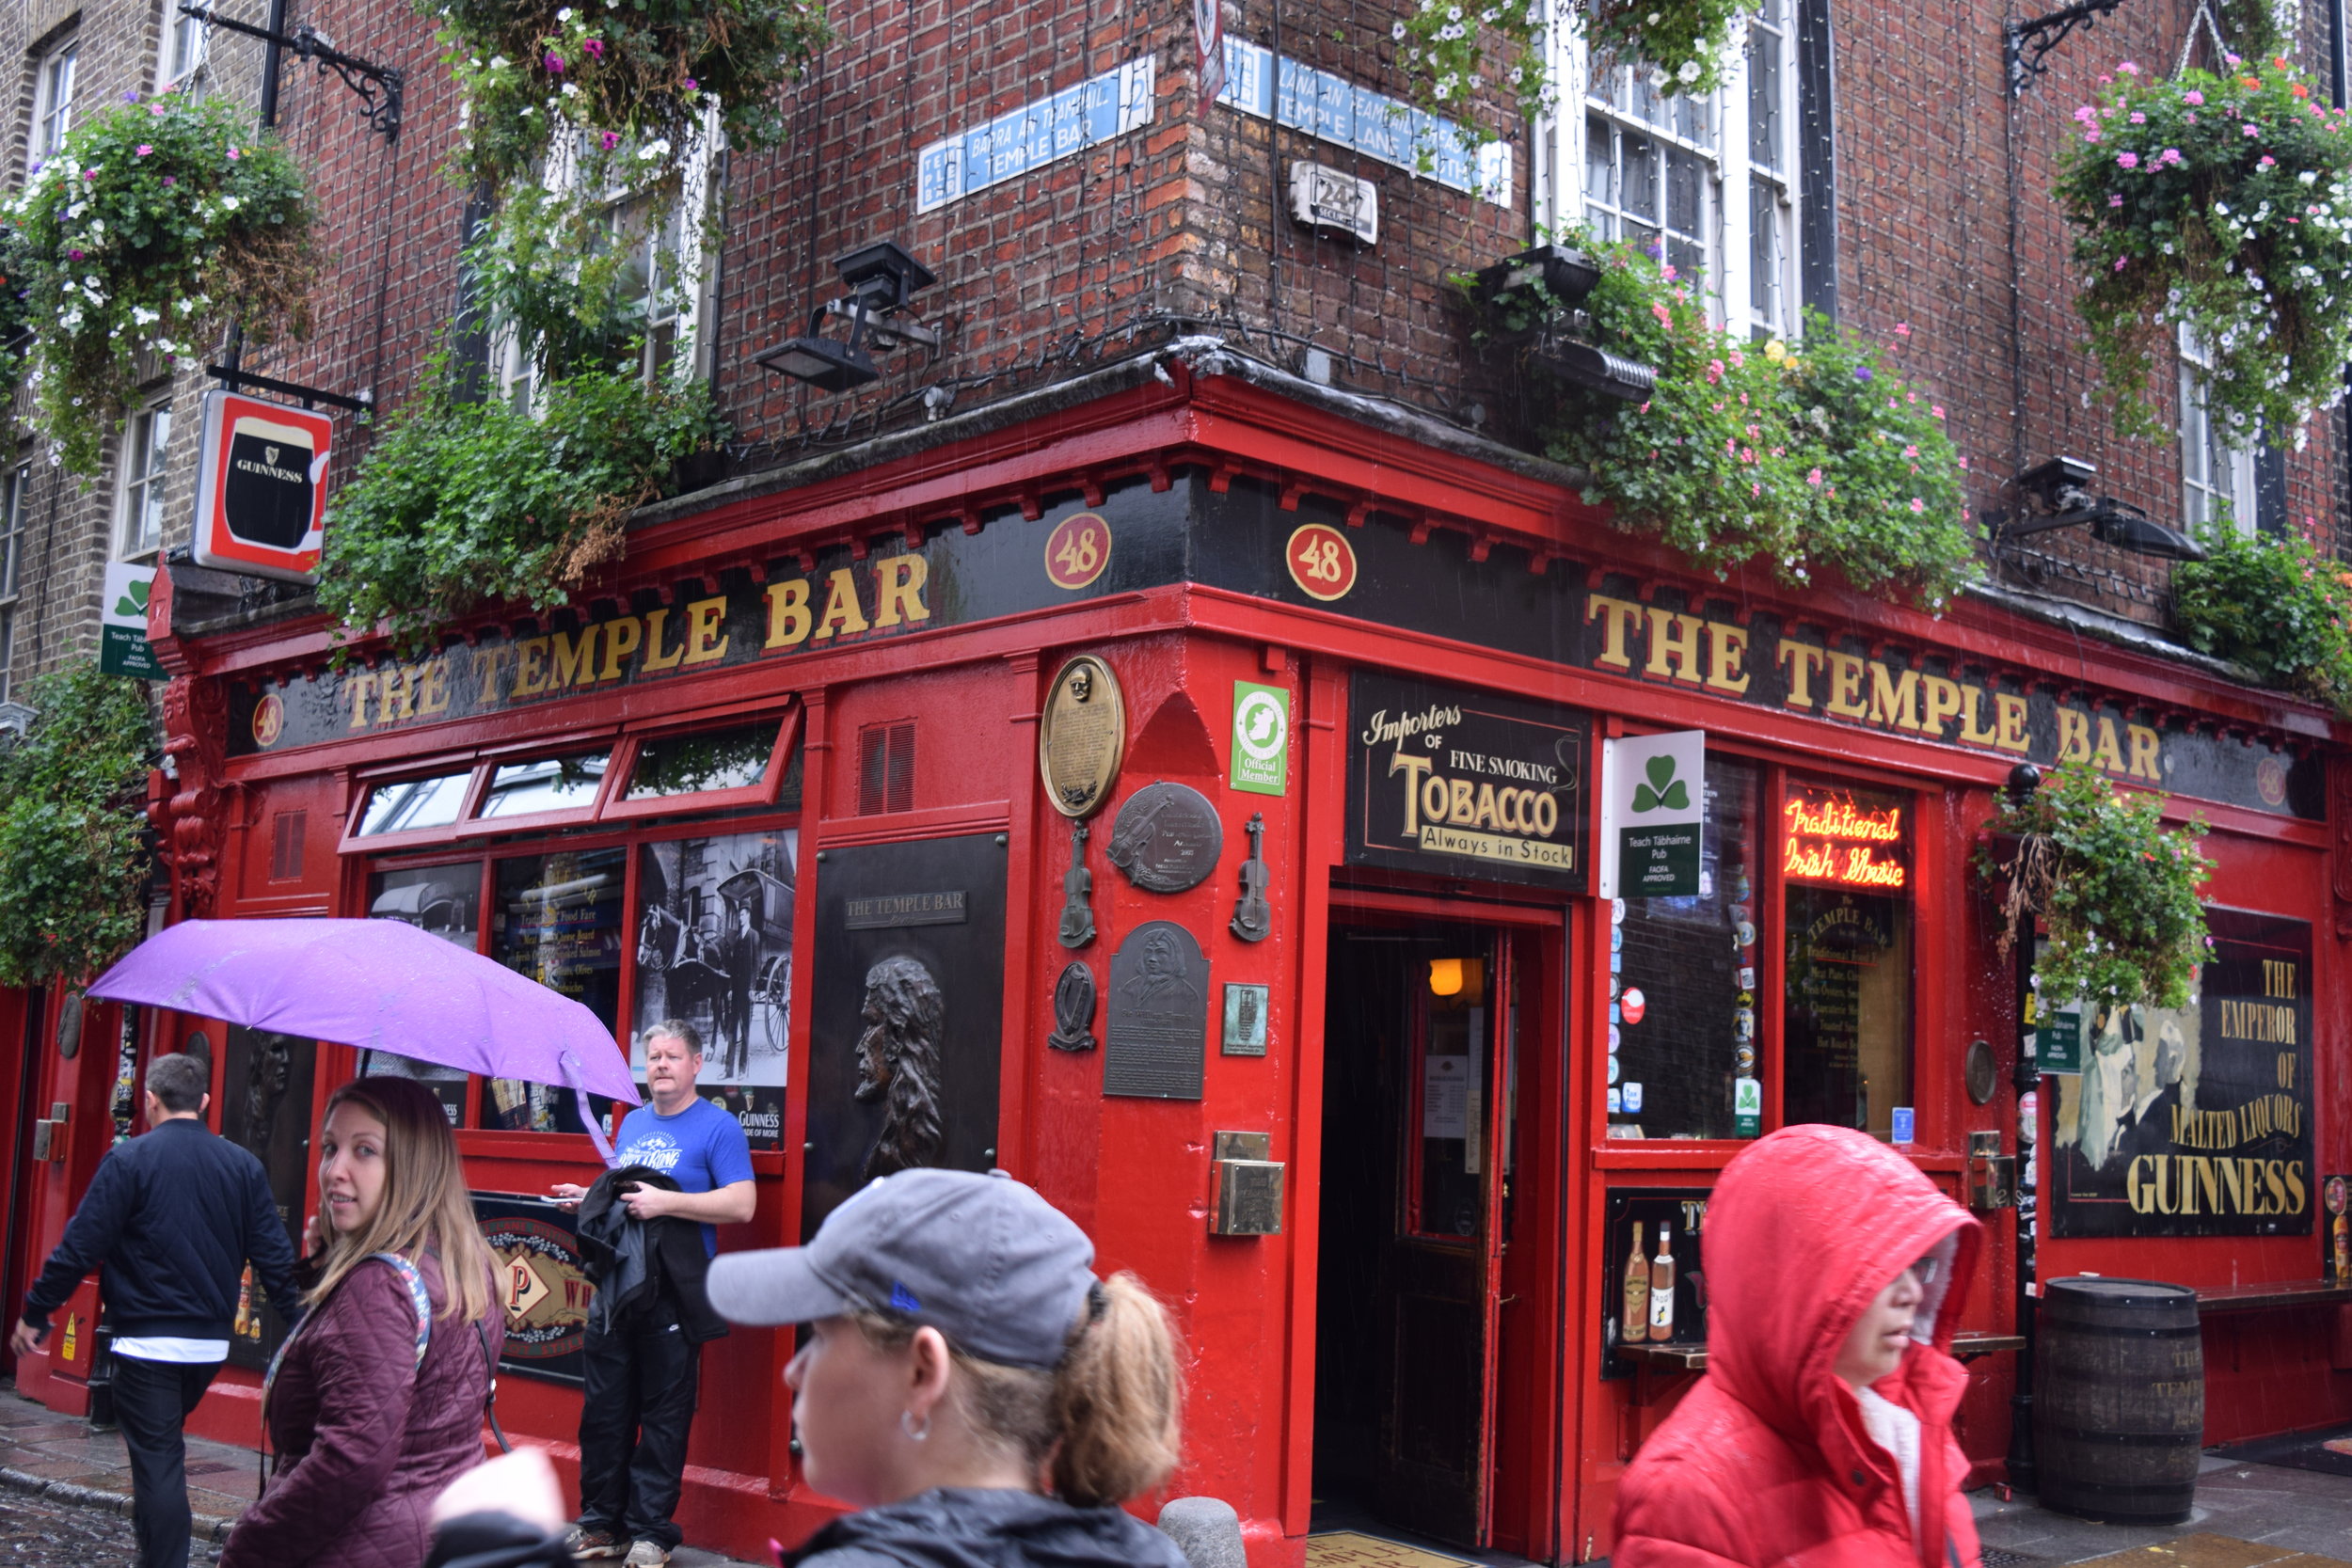 Stopping for a break in the Temple Bar area